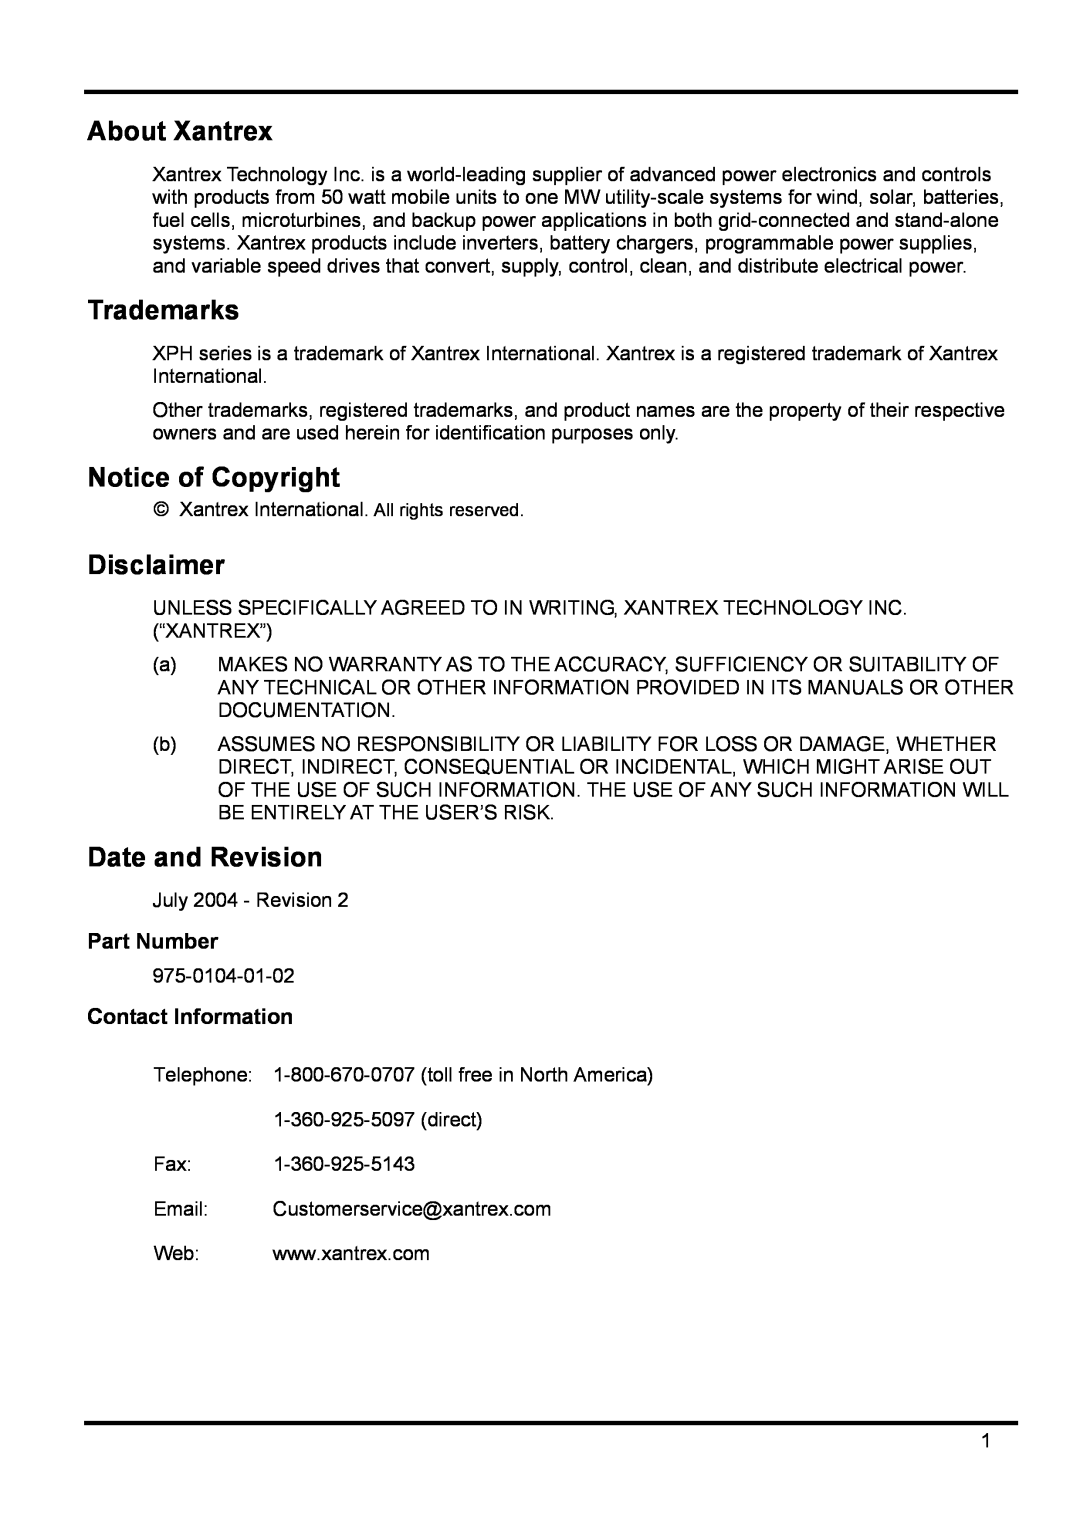 Xantrex Technology 18V 10A About Xantrex, Trademarks, Notice of Copyright, Disclaimer, Date and Revision, Part Number 